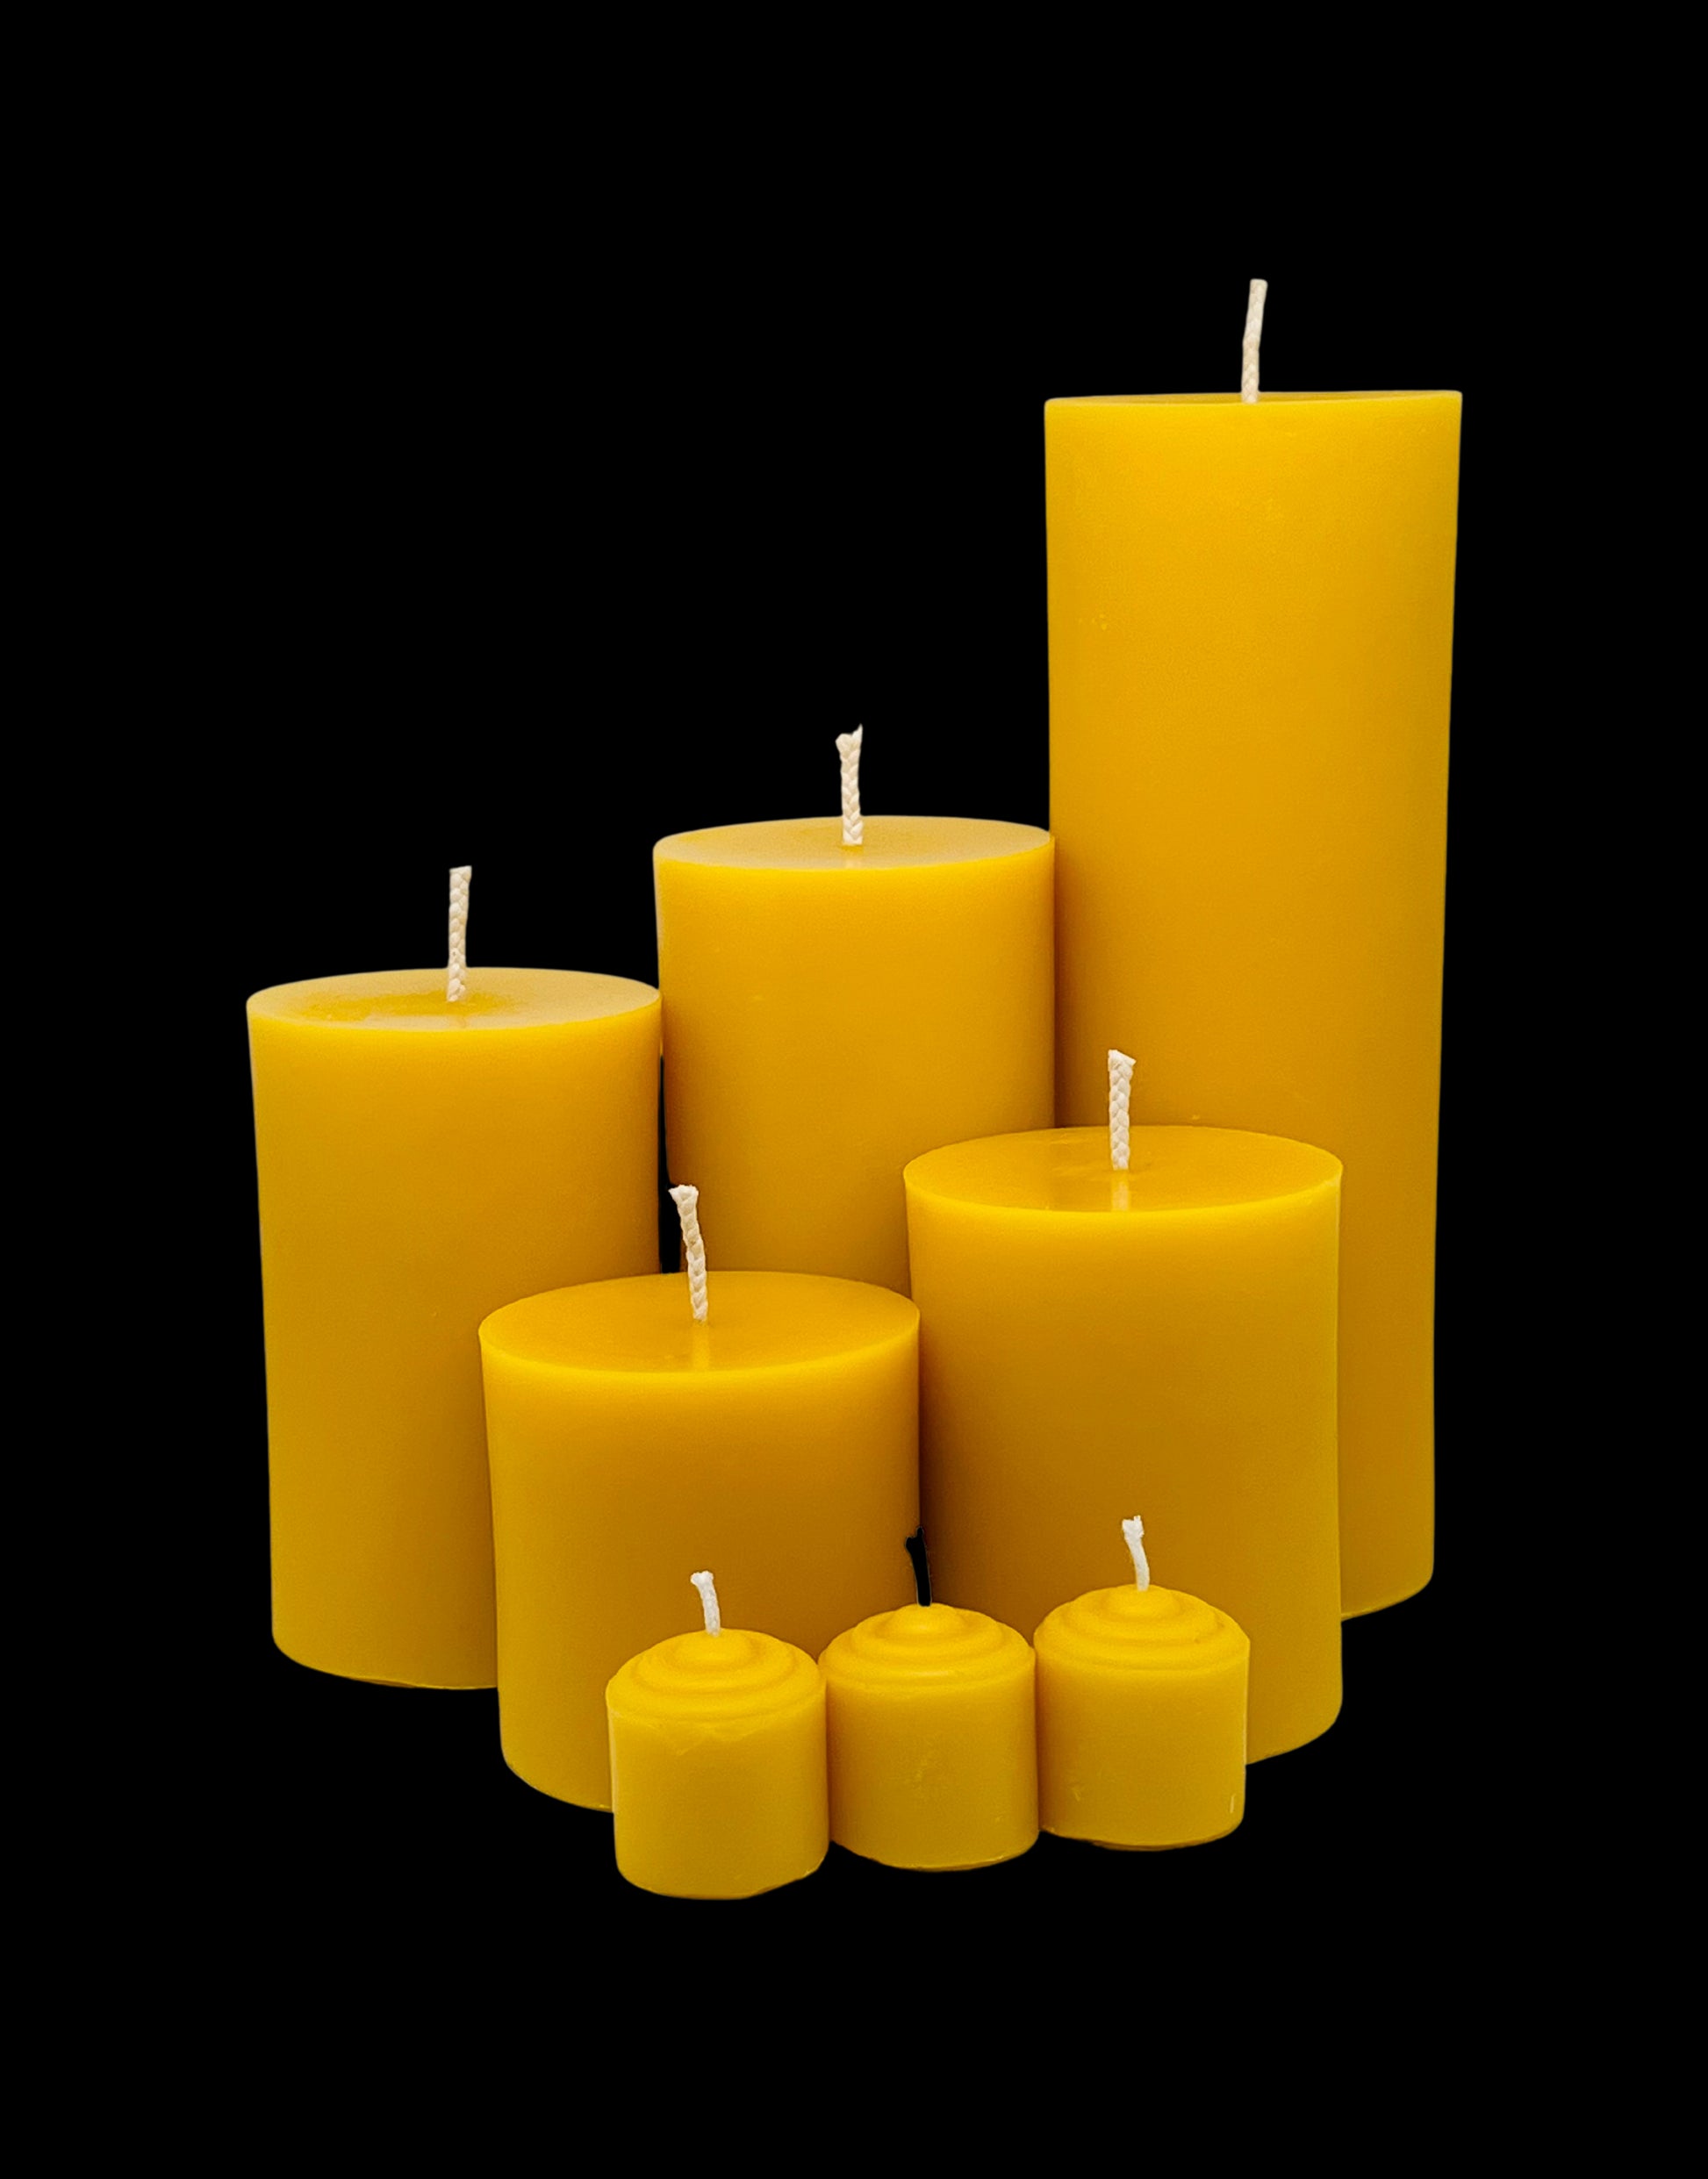 3x3 Pure Beeswax Candle